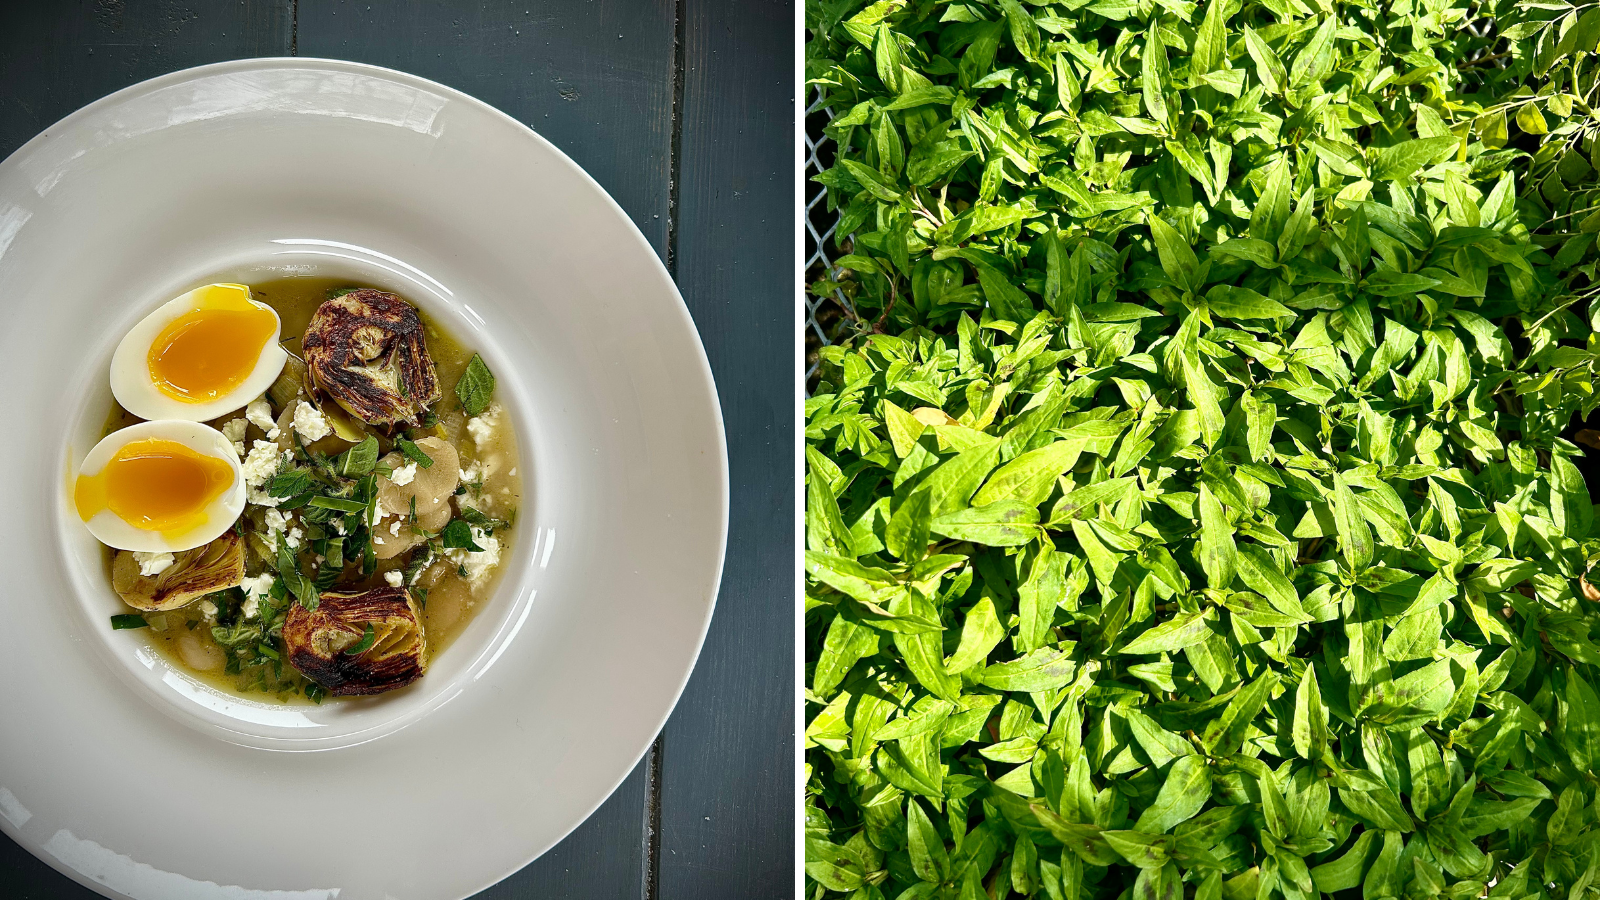 Spring Butter Bean Stew With Grilled Artichokes, Feta And Fresh Herbs by Chef Alex Page